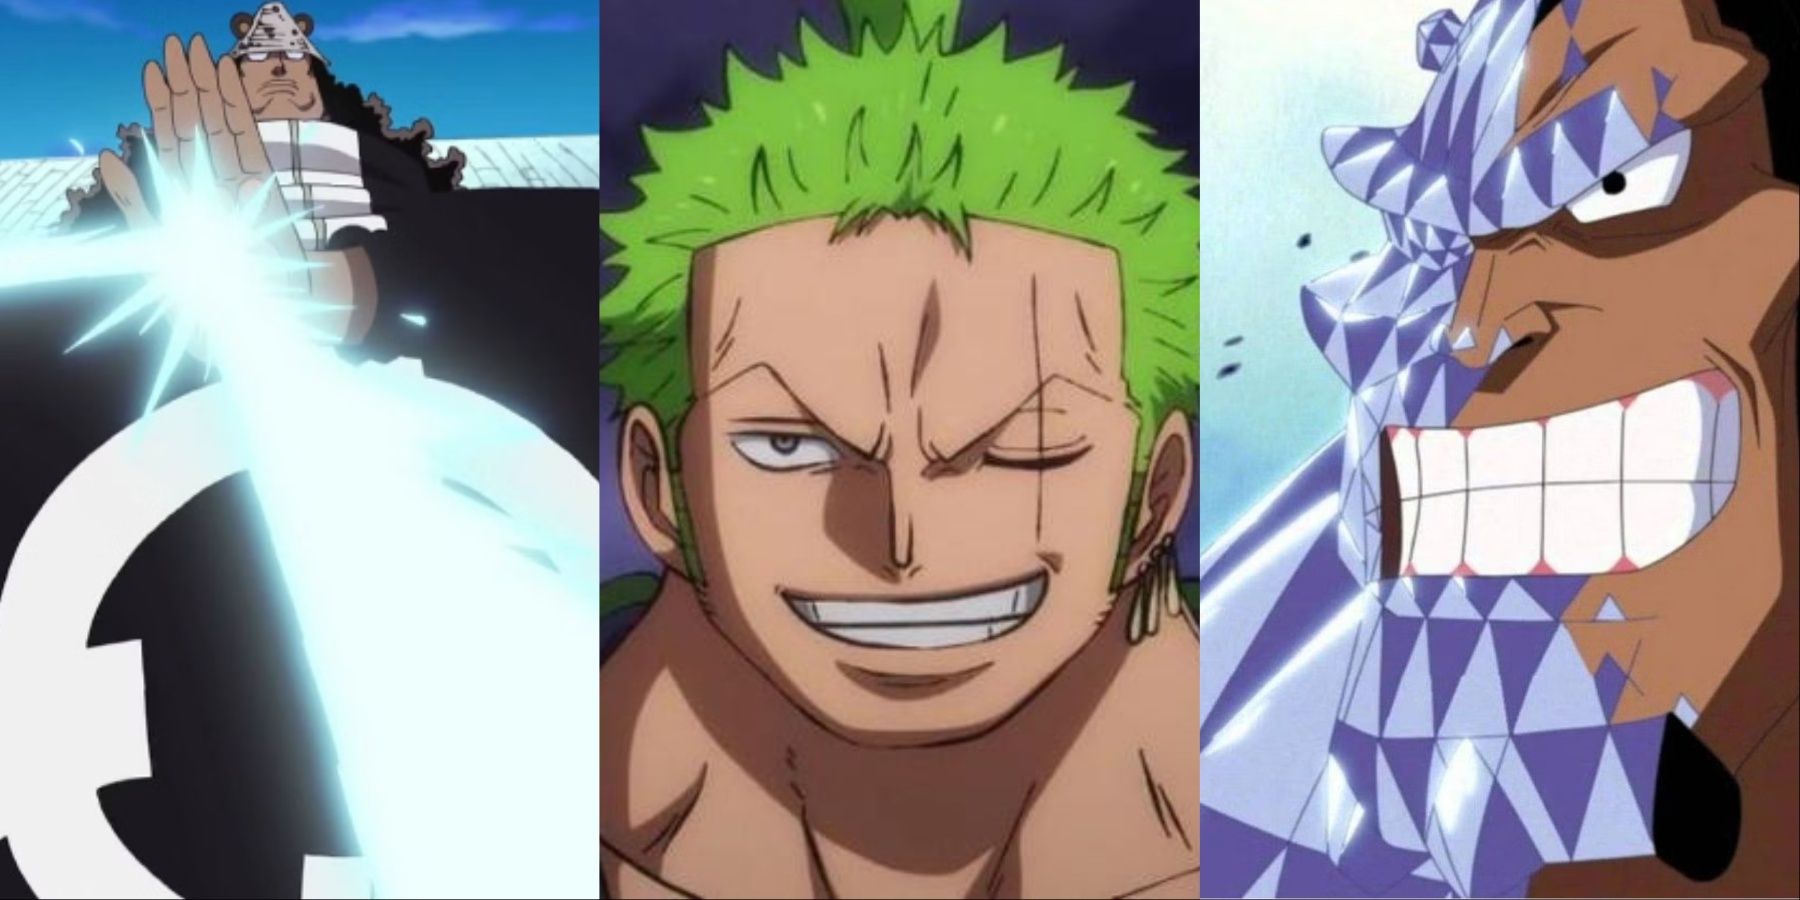 How to make Roronoa Zoro from One Piece in Roblox! (Loguetown and